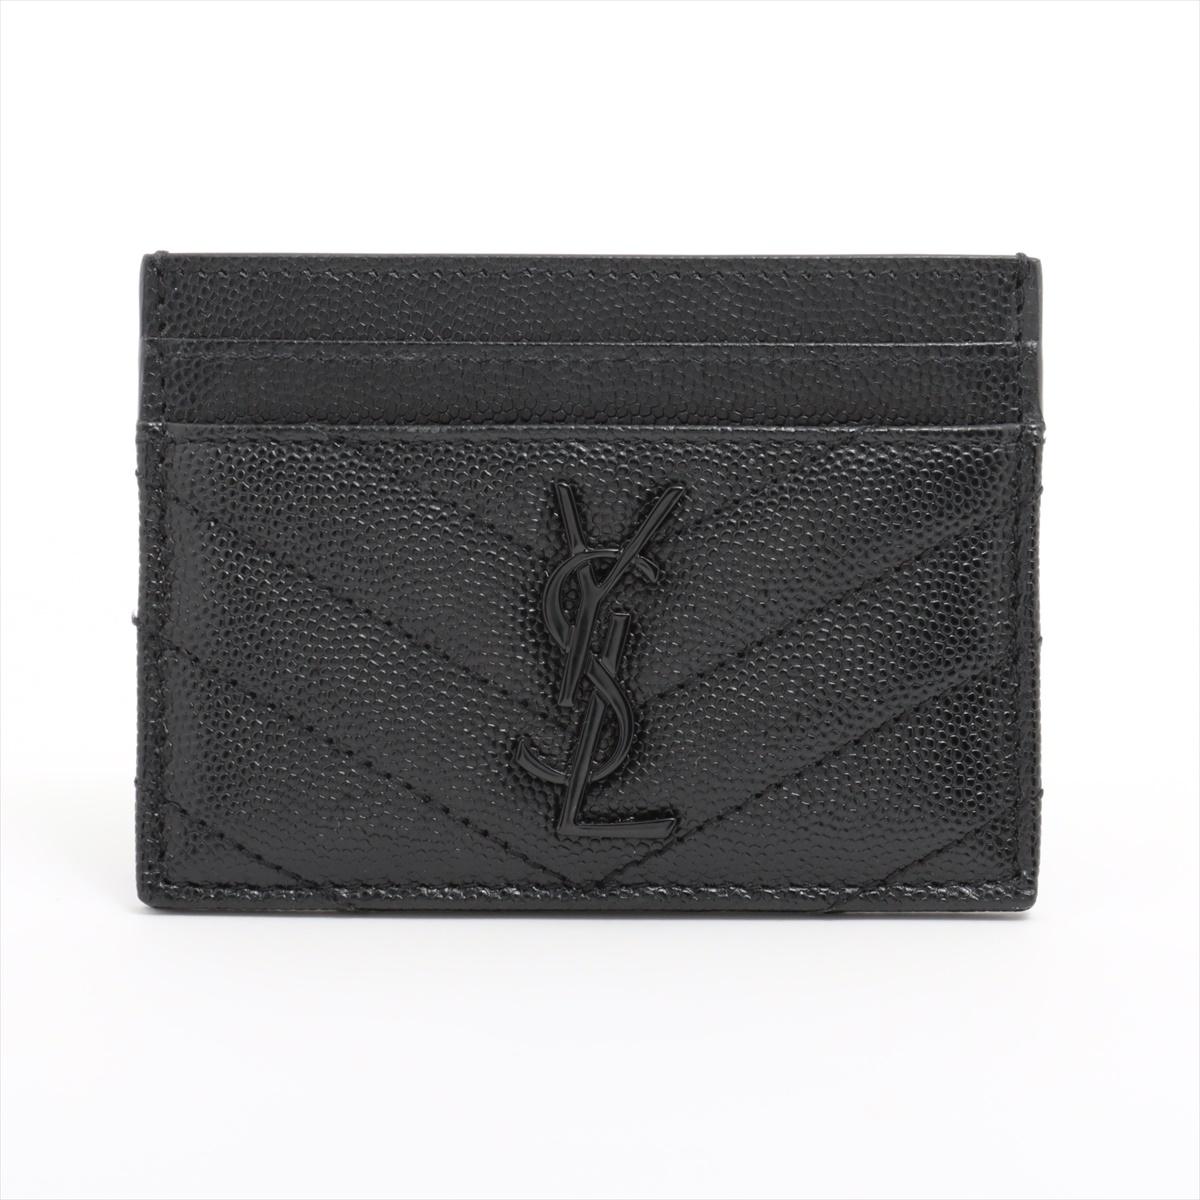 The Saint Laurent V Stitch Leather Card Case in Black is a sleek and sophisticated accessory that exemplifies the brand's minimalist yet luxurious design. Crafted from smooth leather, the card case features a distinctive V-shaped stitch detail on